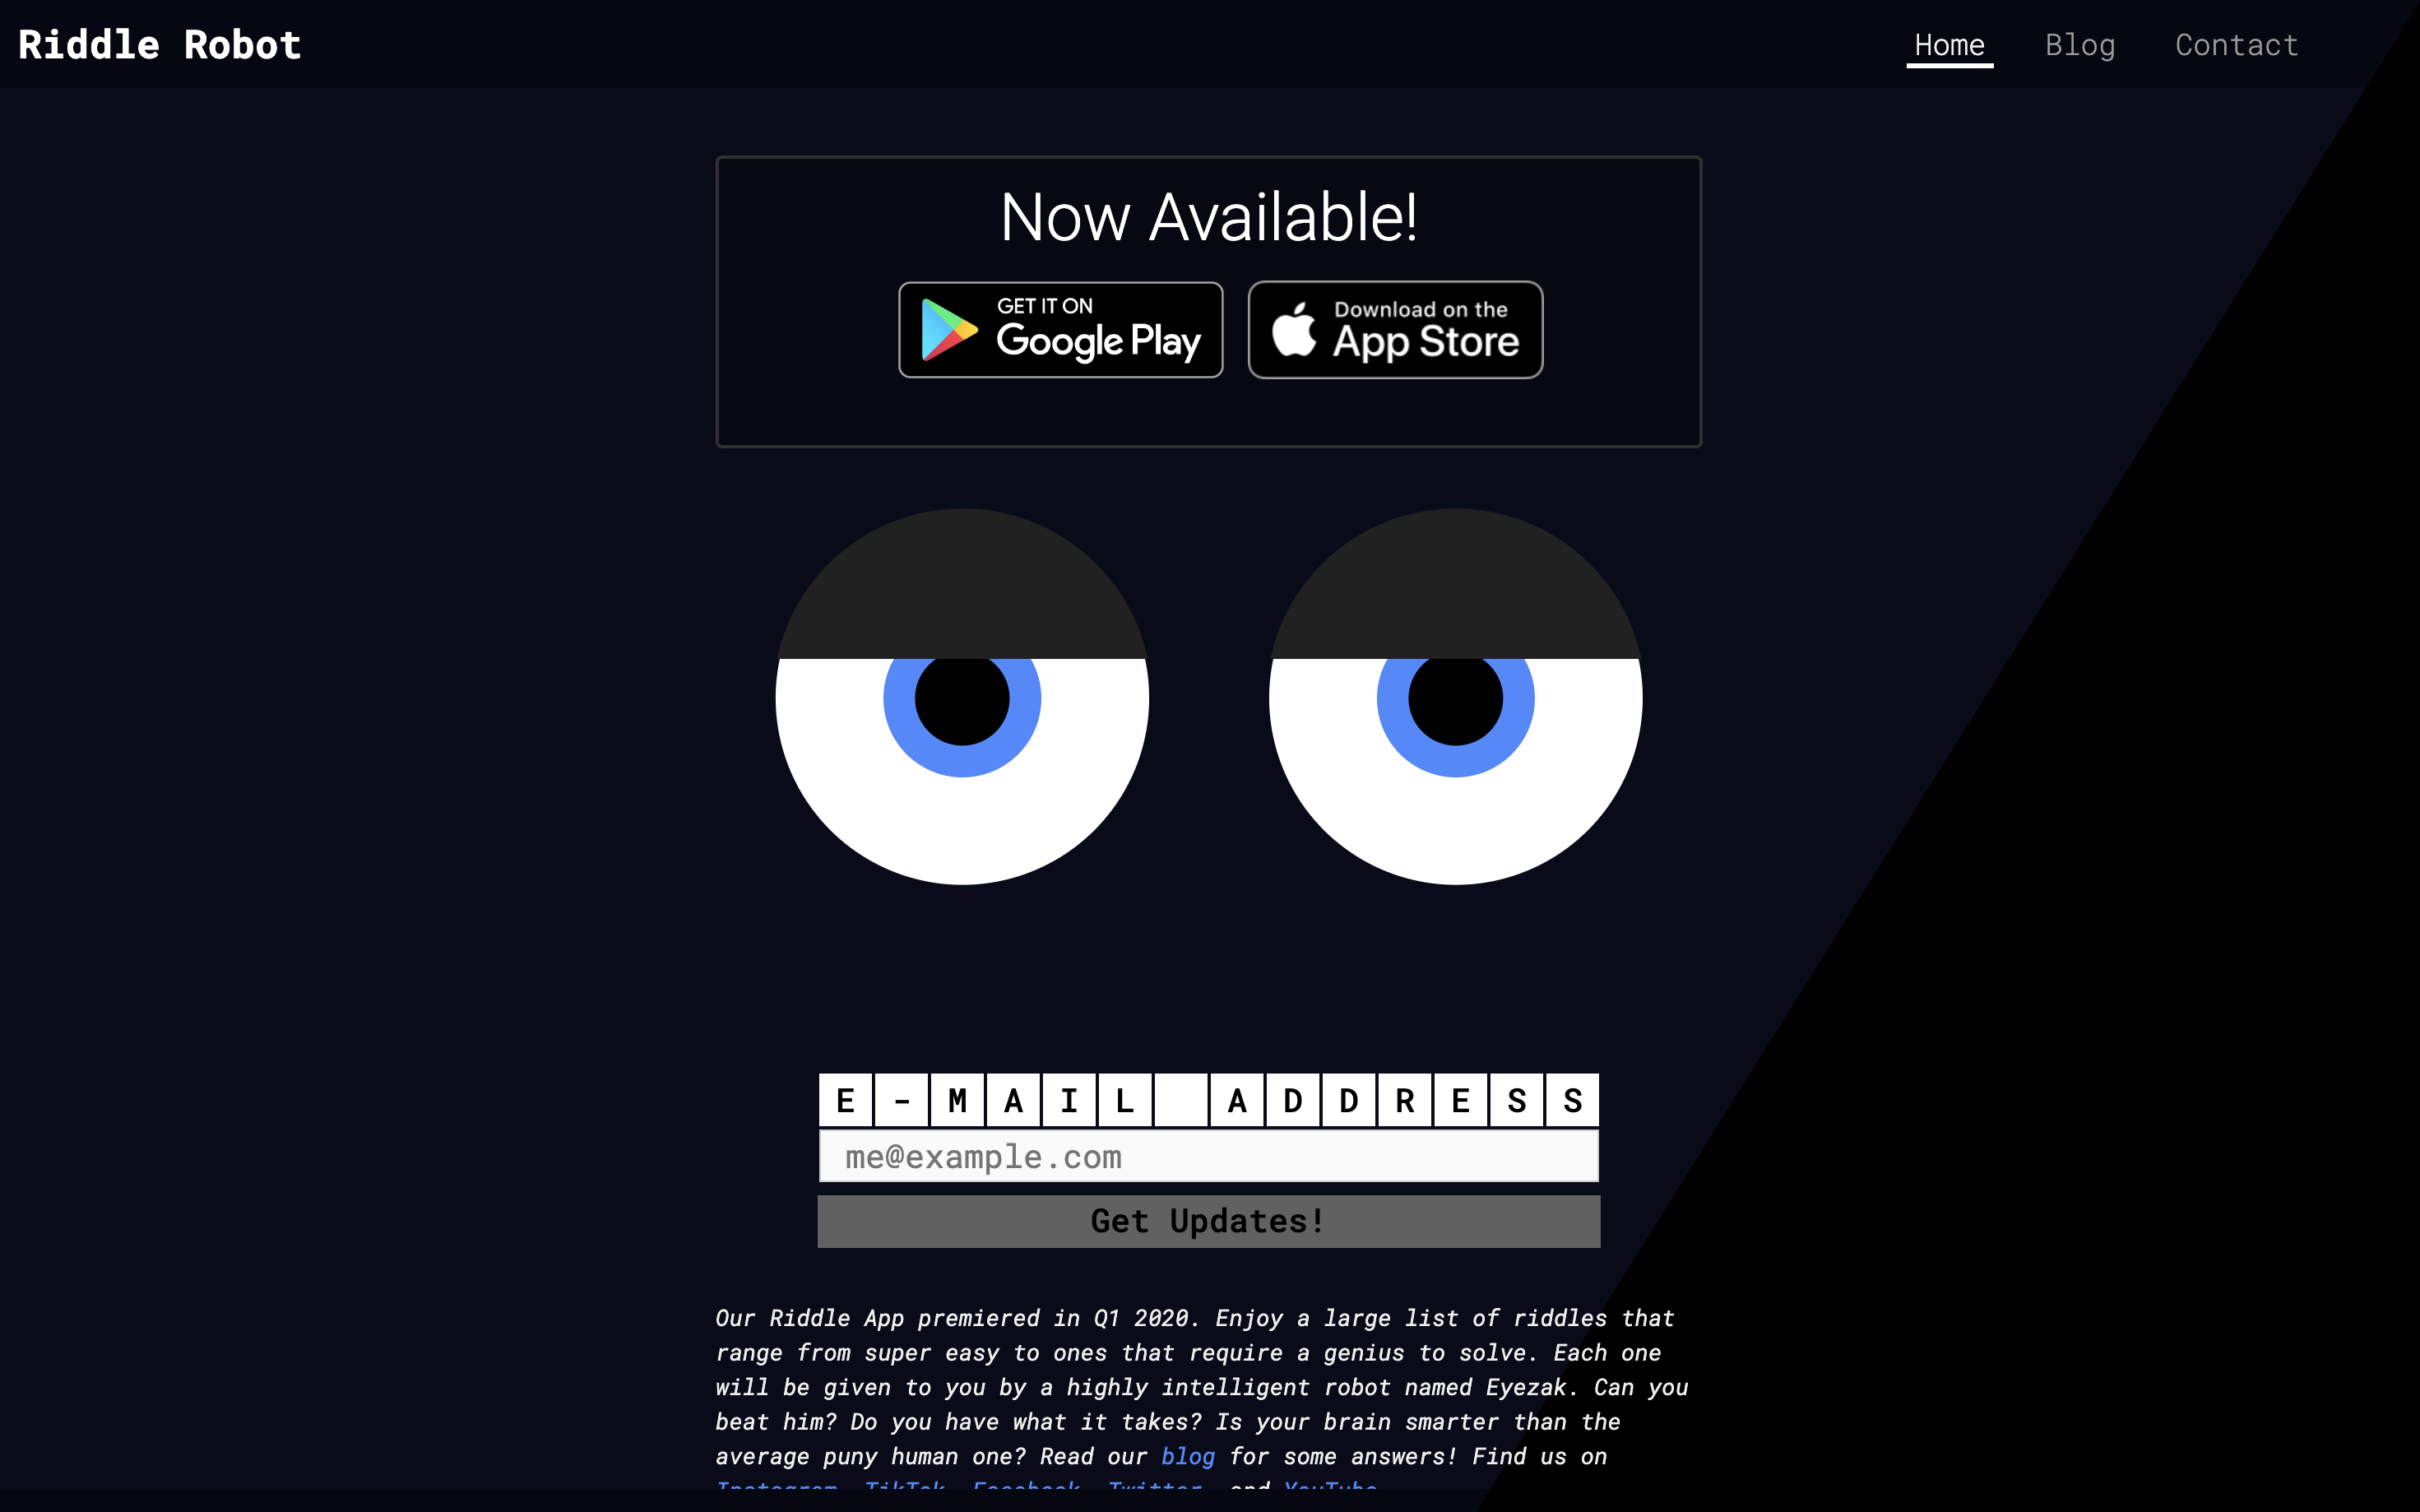 Screenshot of RiddleRobot.com, Eyezak the Puzzle Master has 1000s of riddles for you!